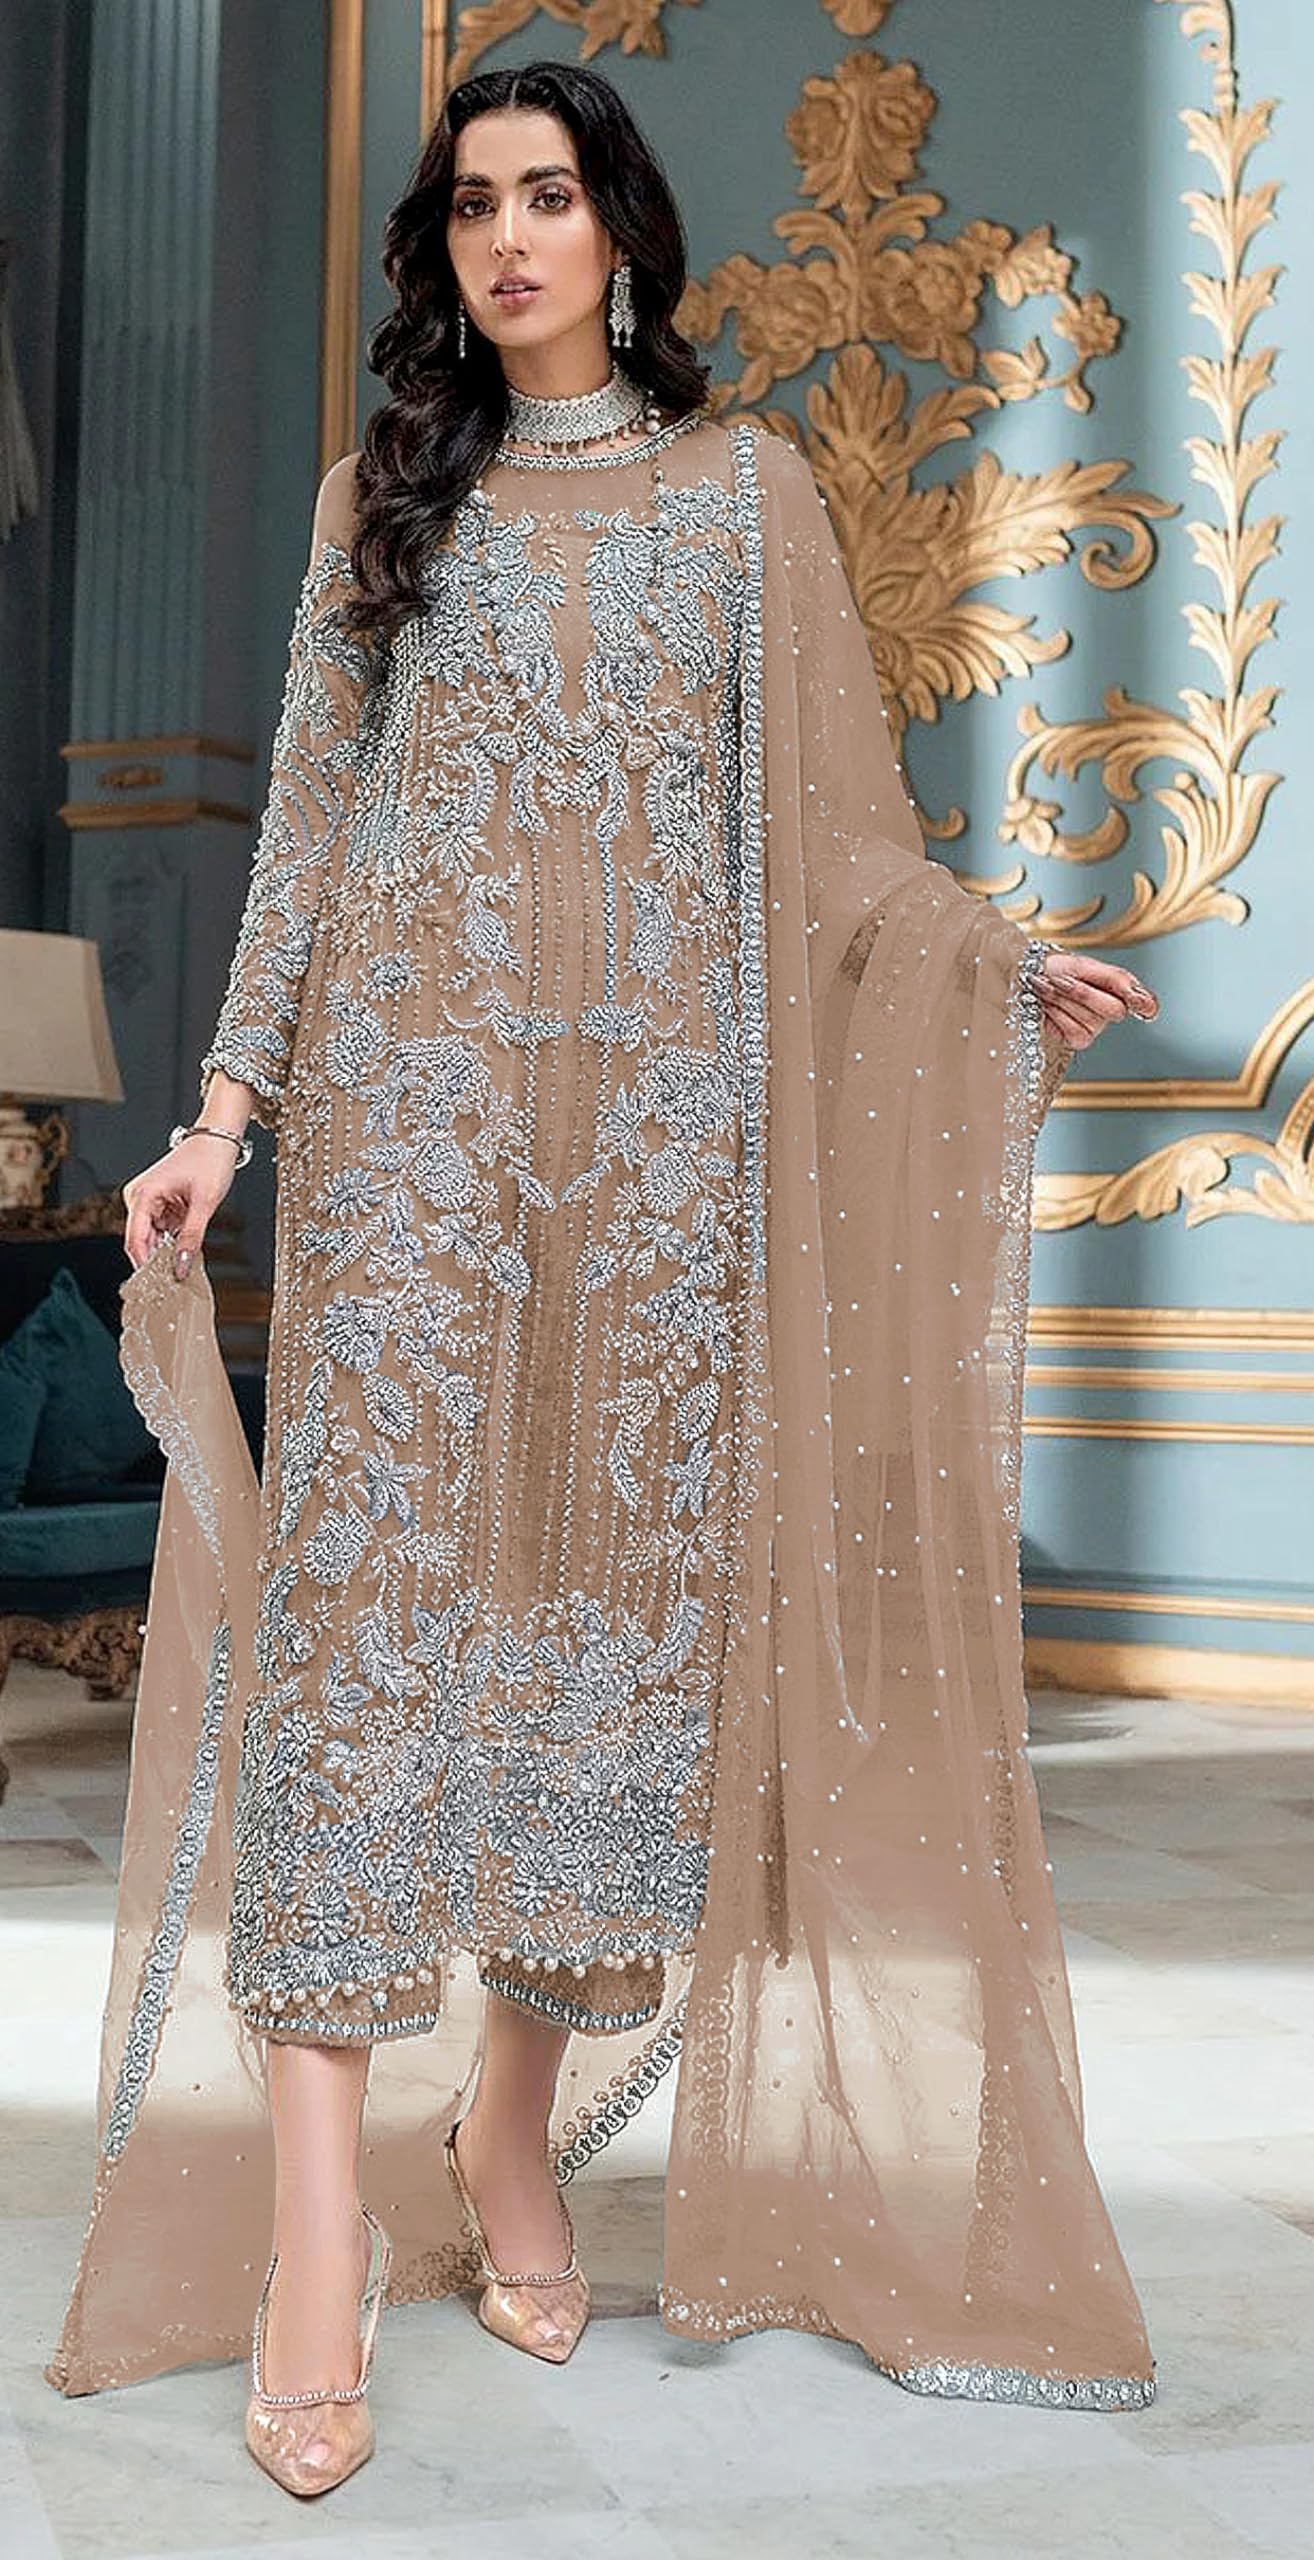 STELLACOUTURE women's ready to wear embroidered plus size eid festival pakistani salwar kameez suit for women 1032-O